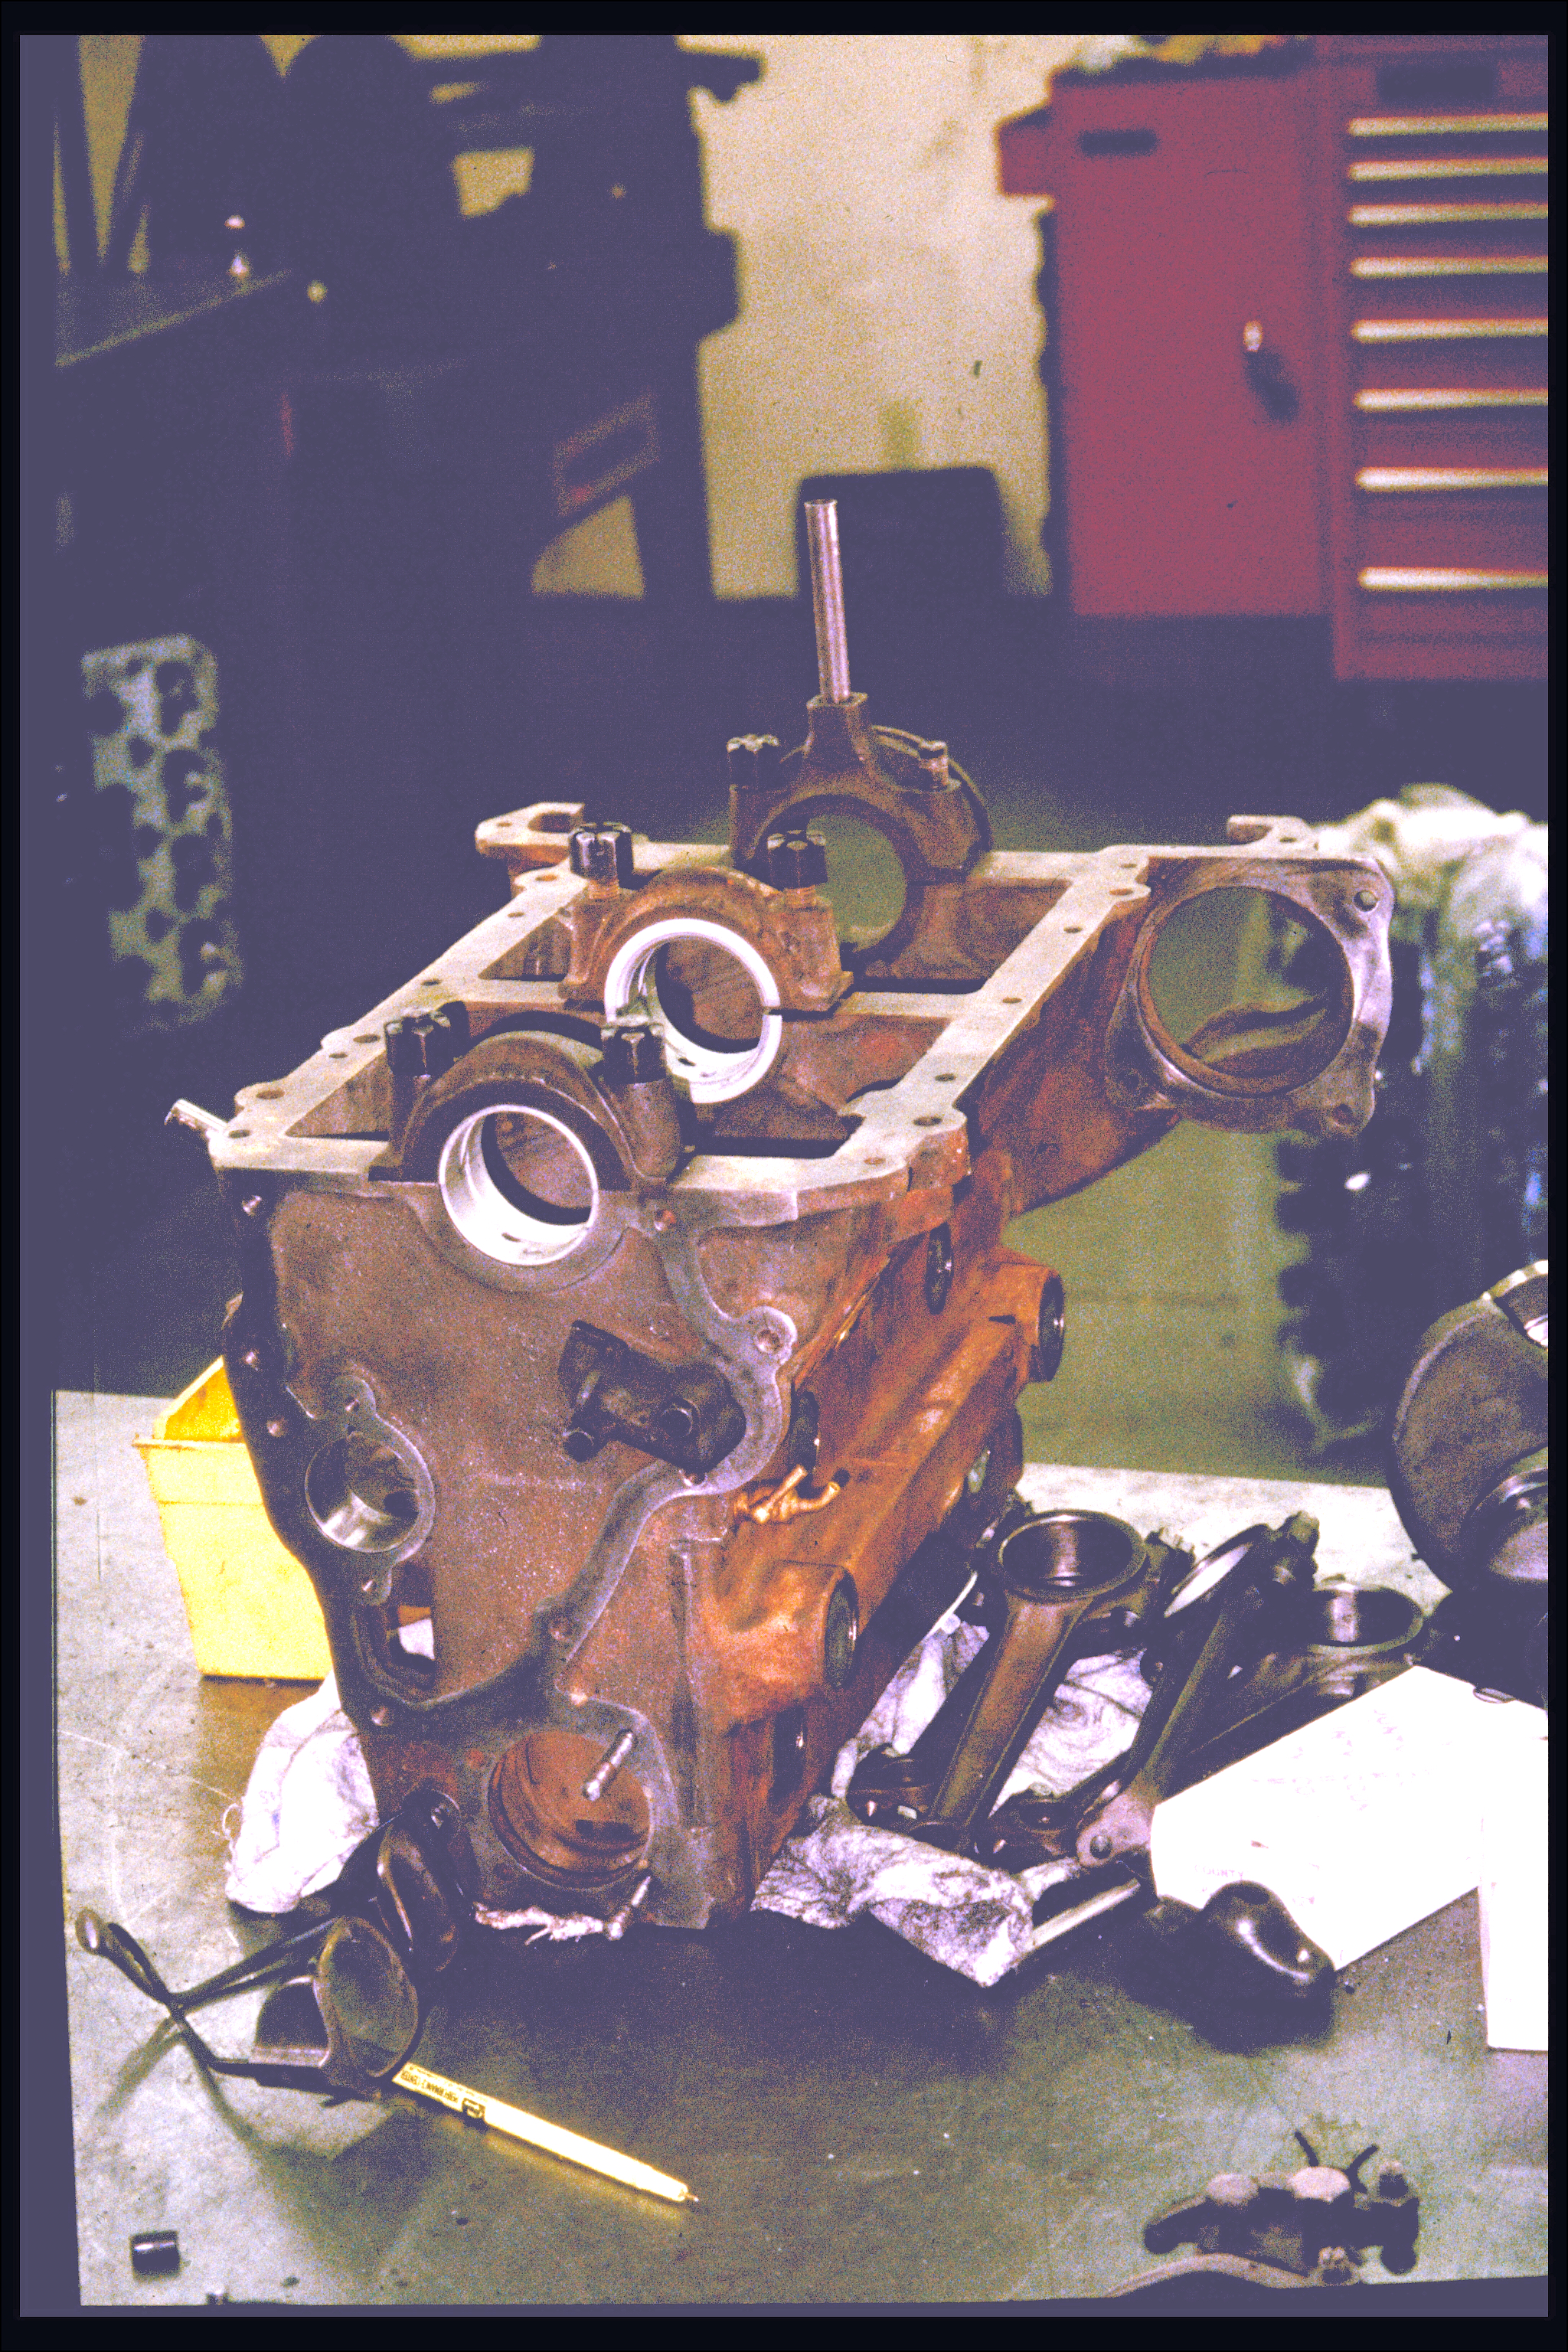 Engine block (inverted) and piston rods